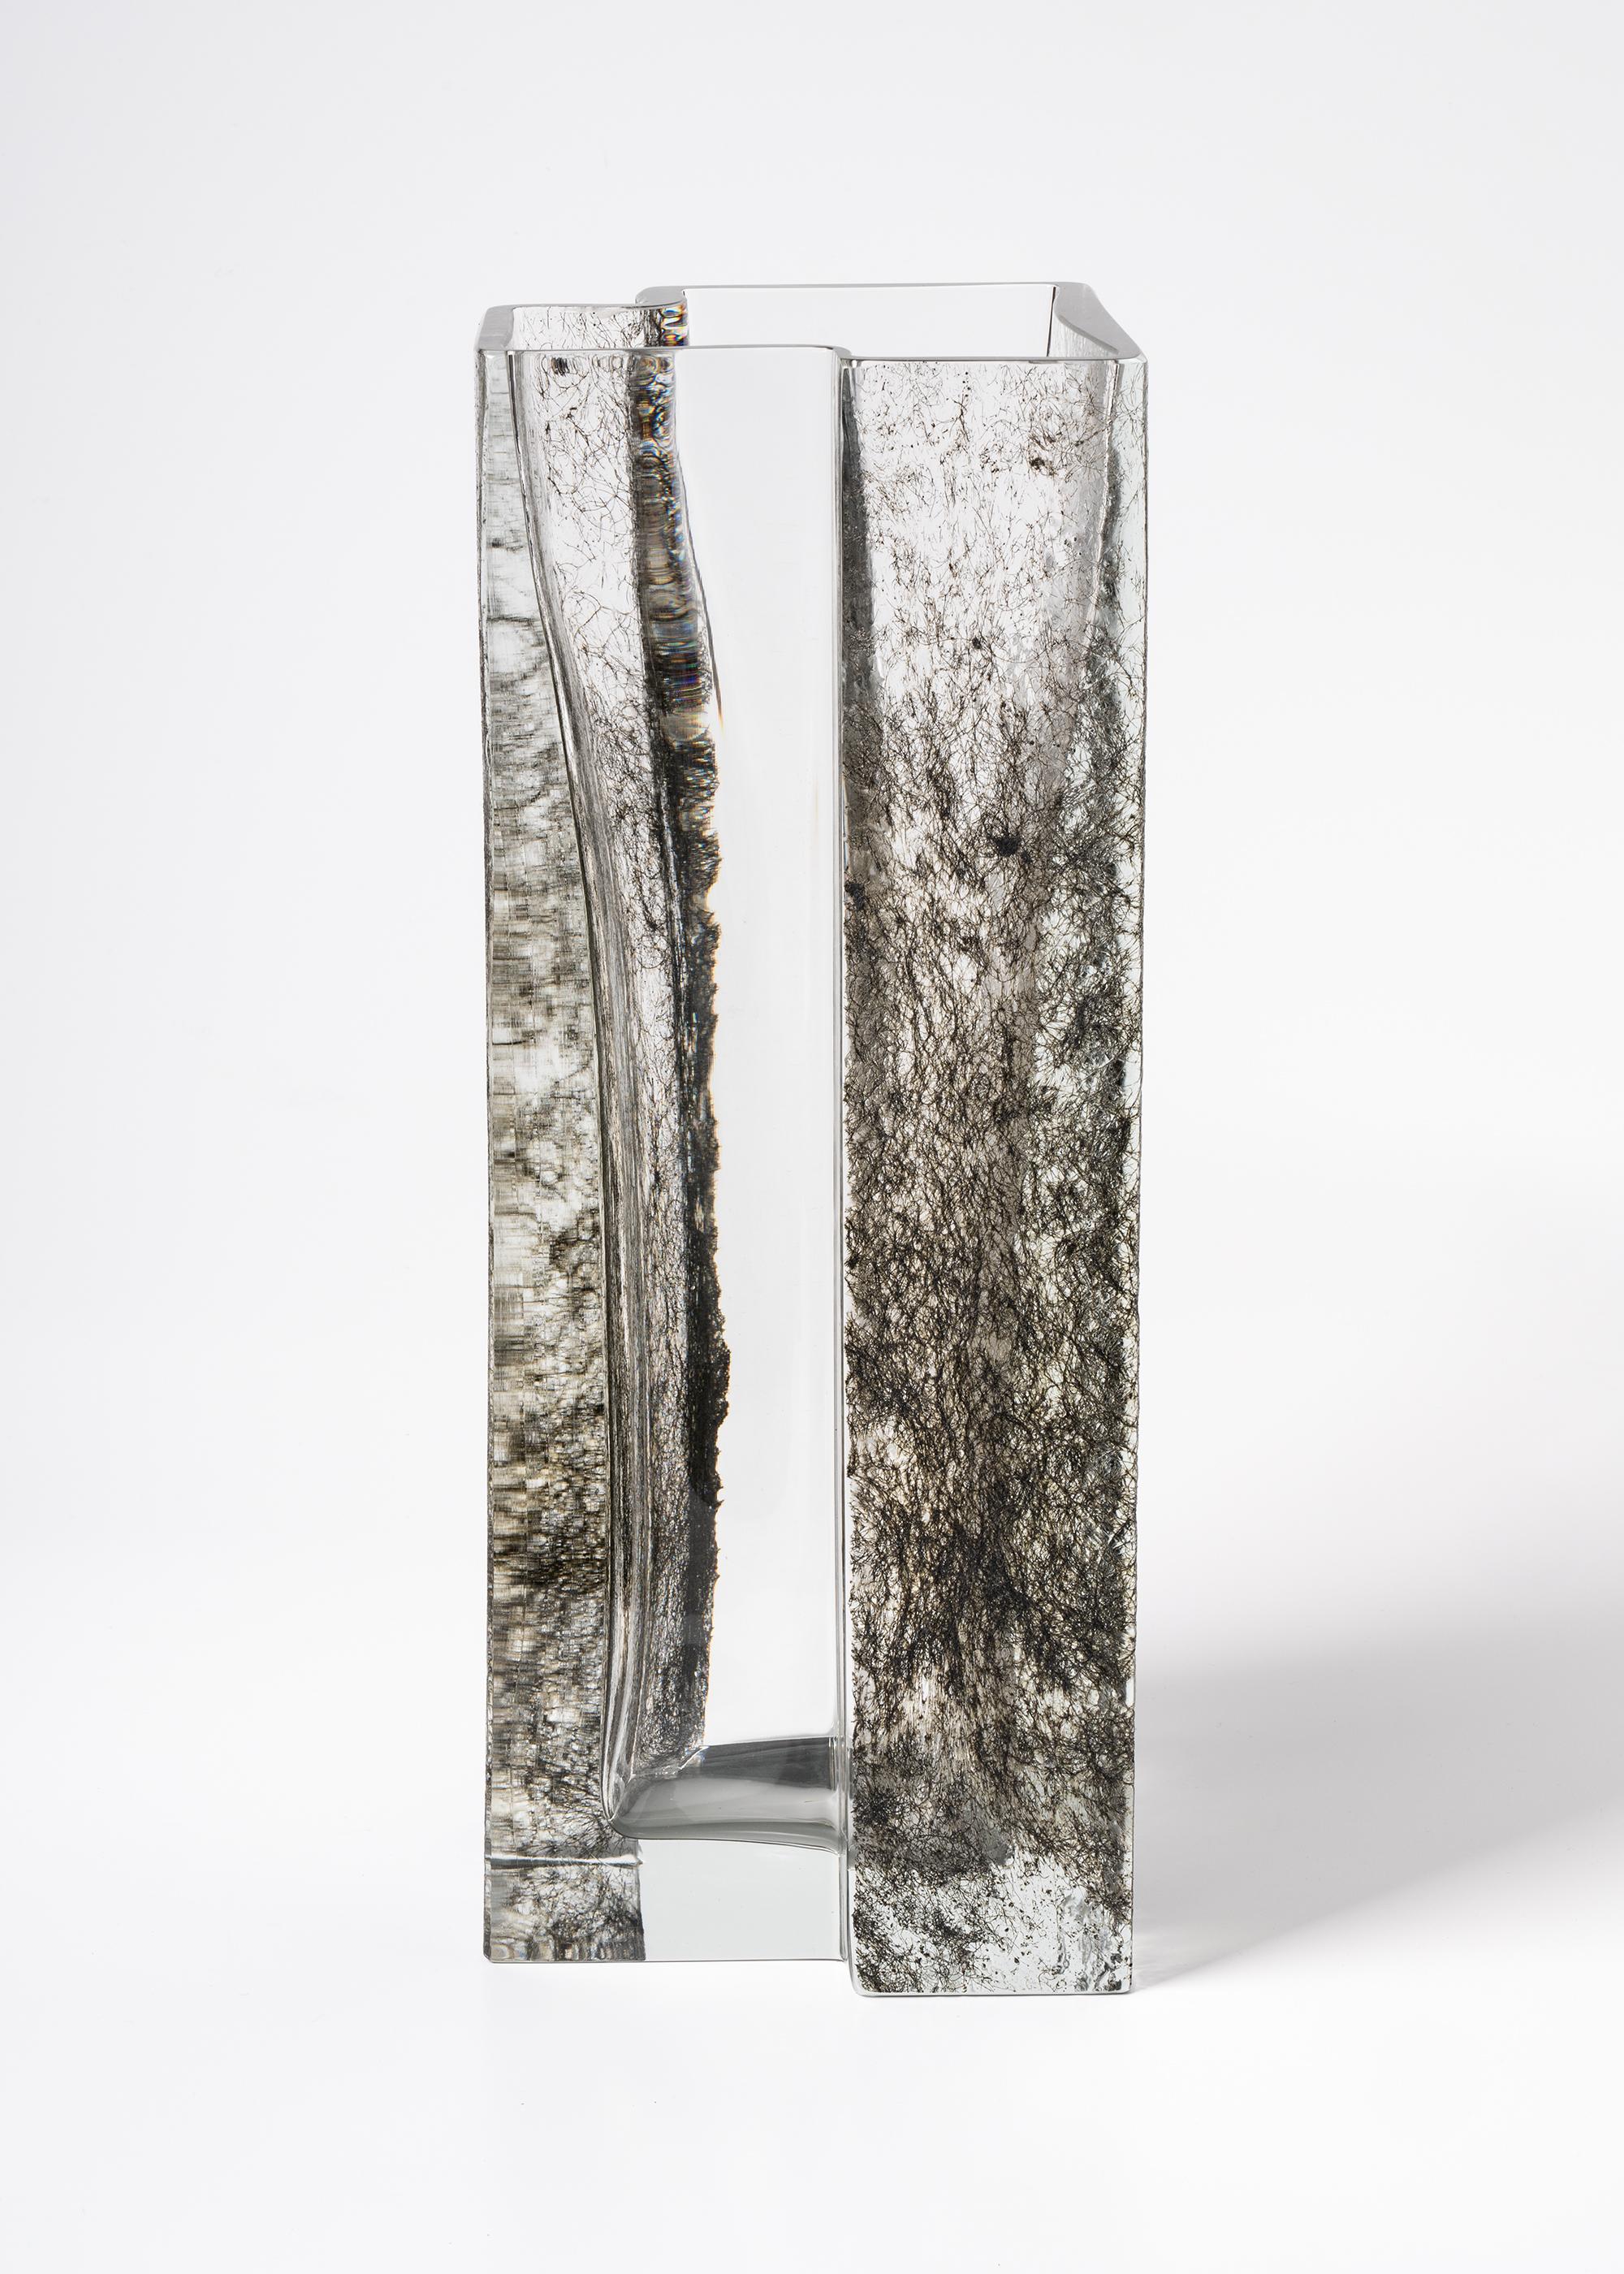 Inside the wood sculpted Murano glass vase by PAOLO MARCOLONGO 
2018
Dimensions: 42.2 x 16.1 x 16.6 cm
Materials: Murano glass, iron

Born in Padua in 1956, he attended the Art High School 